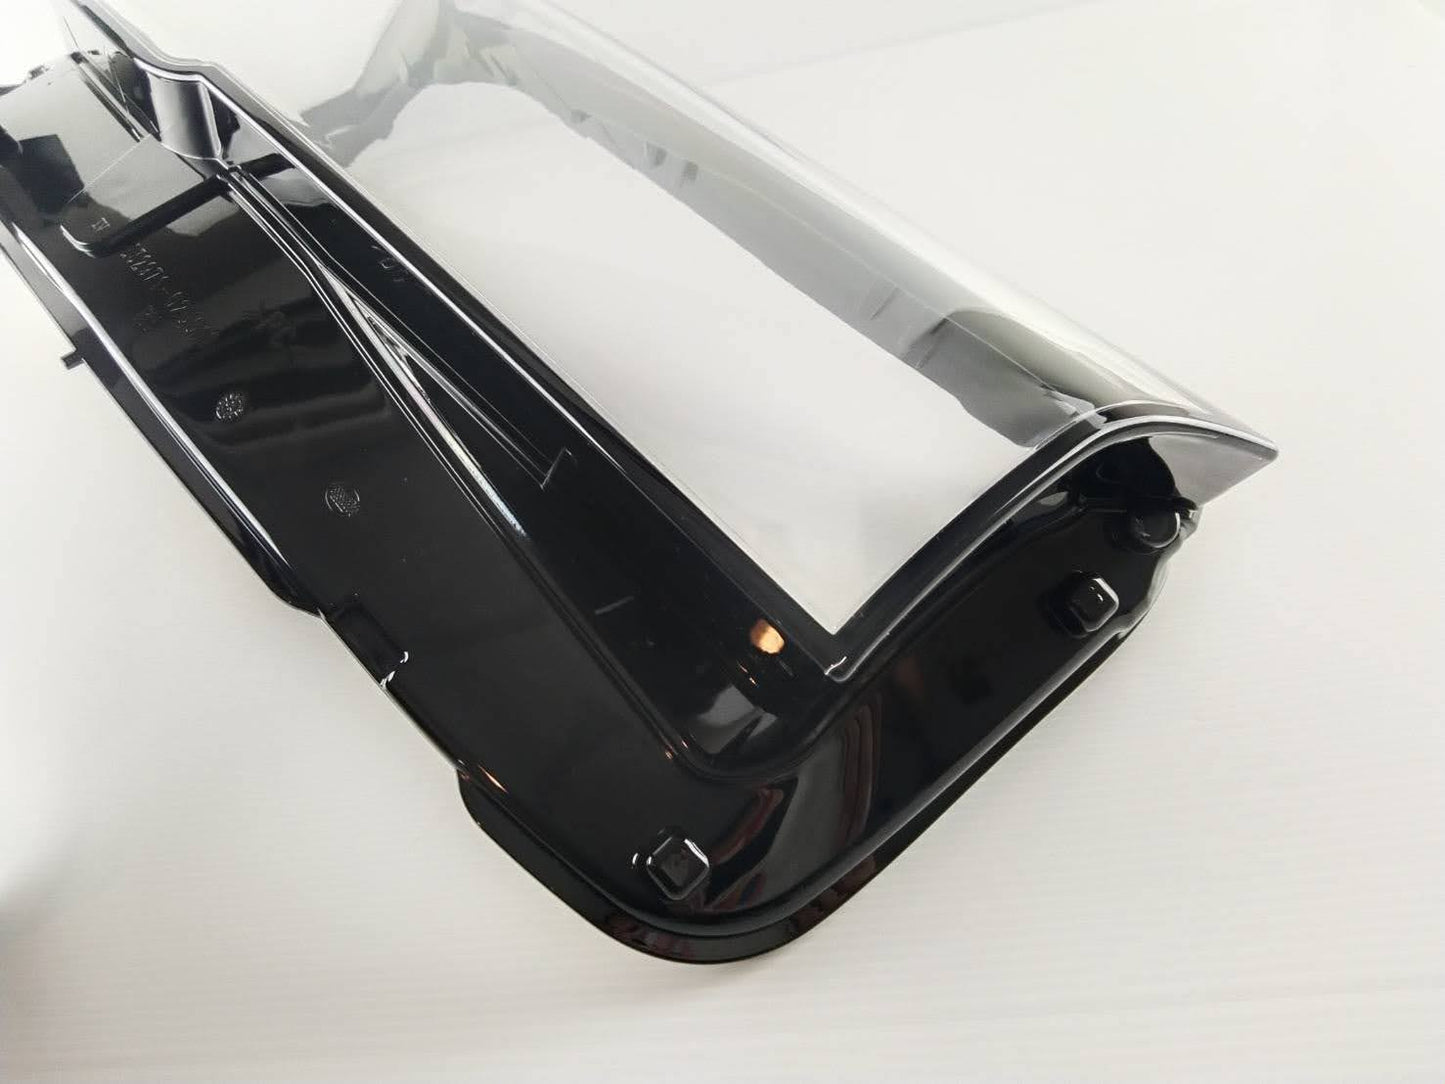 Cover Shell For BMW G20/G28 (19-20)